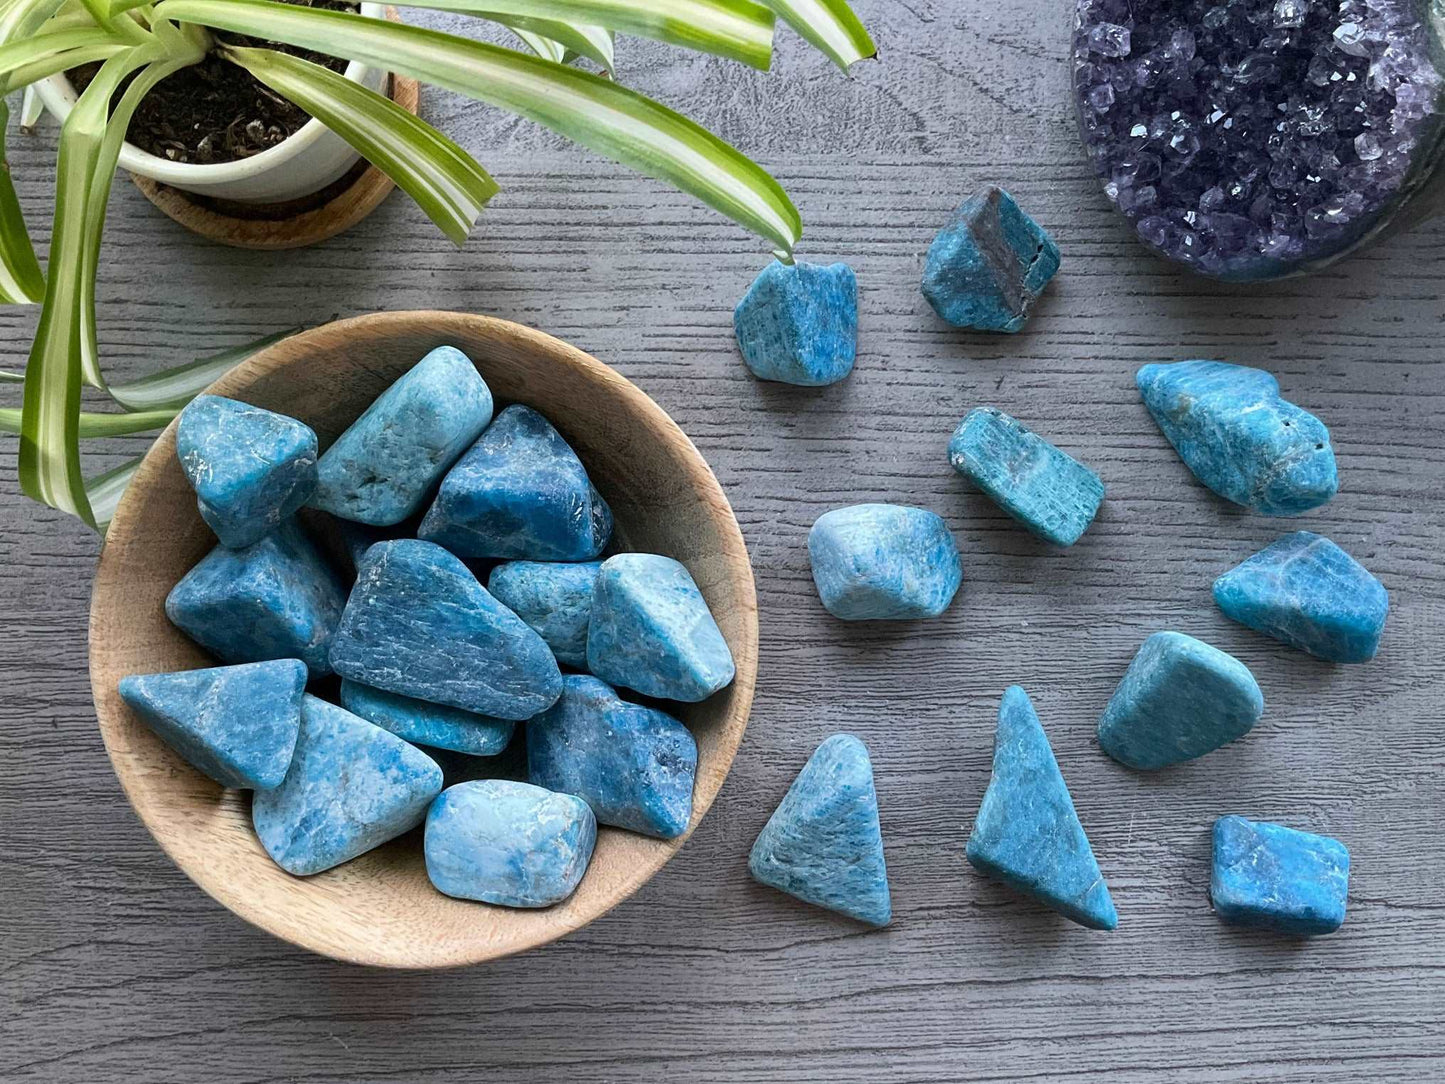 Pictured are various Blue Apatite Tumbled Stone (Large)apatite tumbled stones.